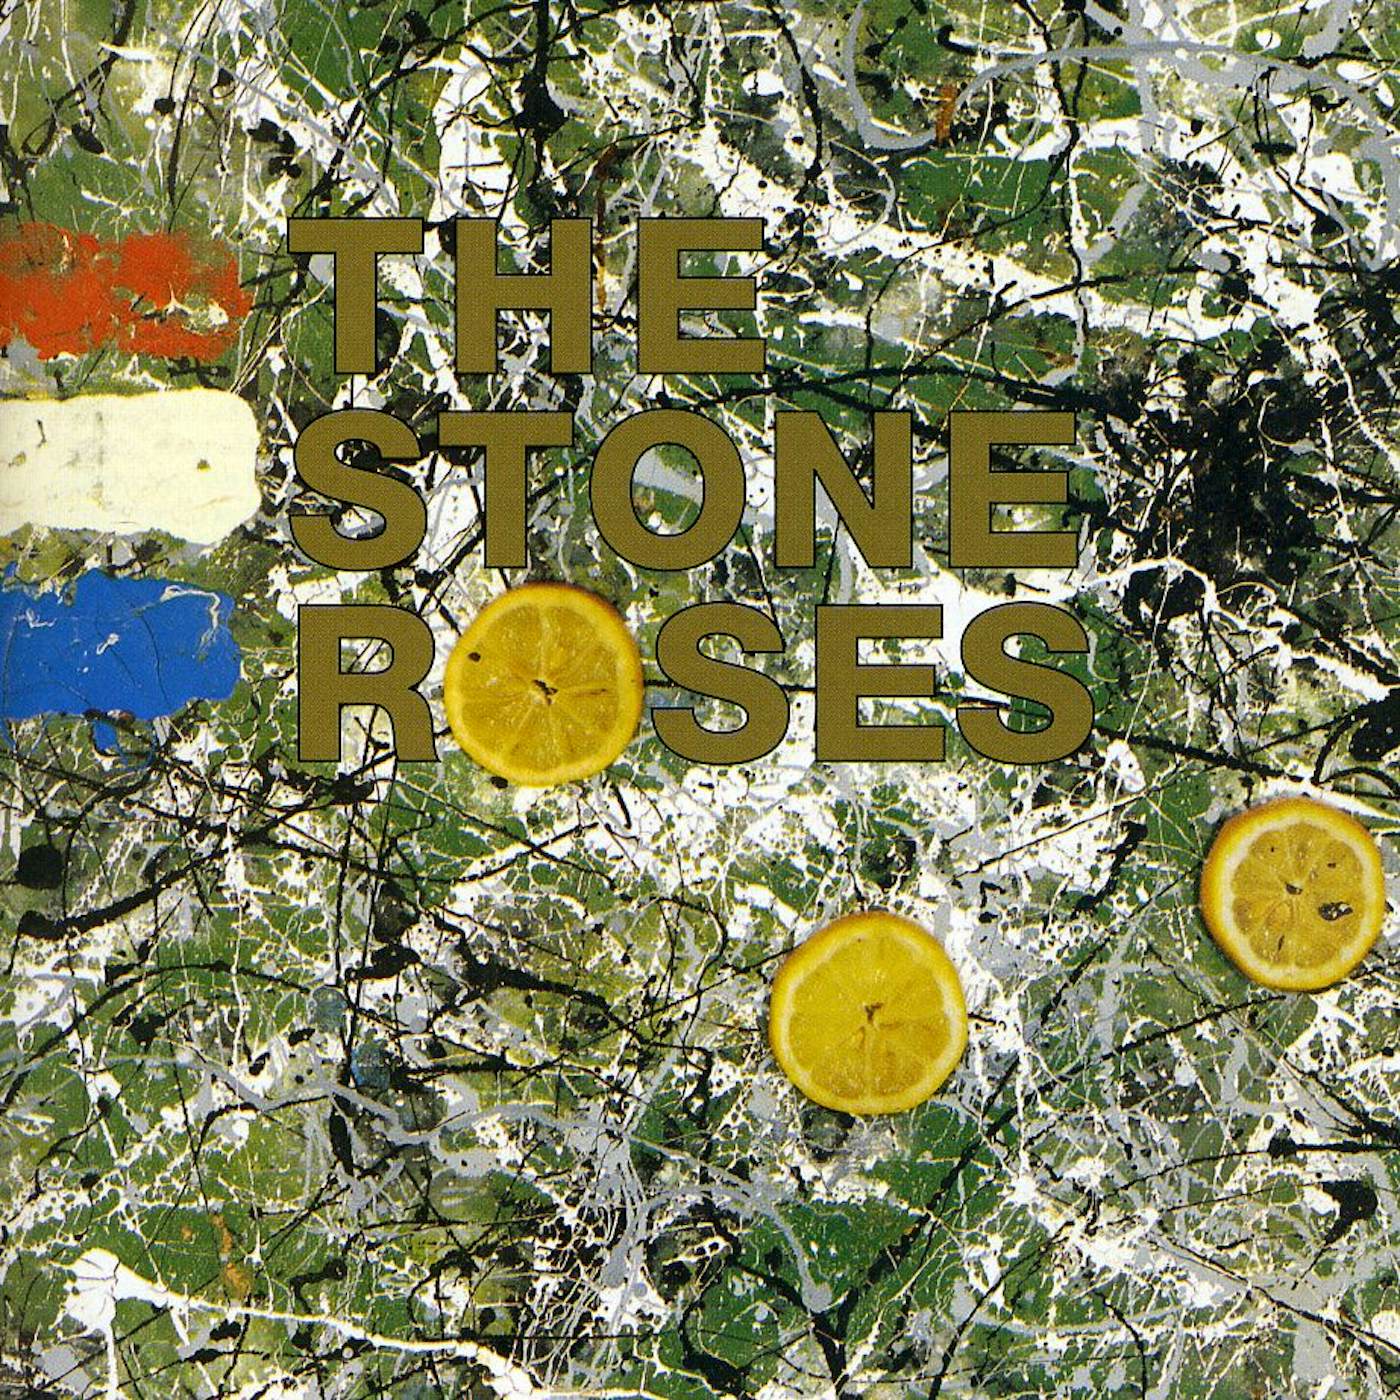 The Stone Roses CD